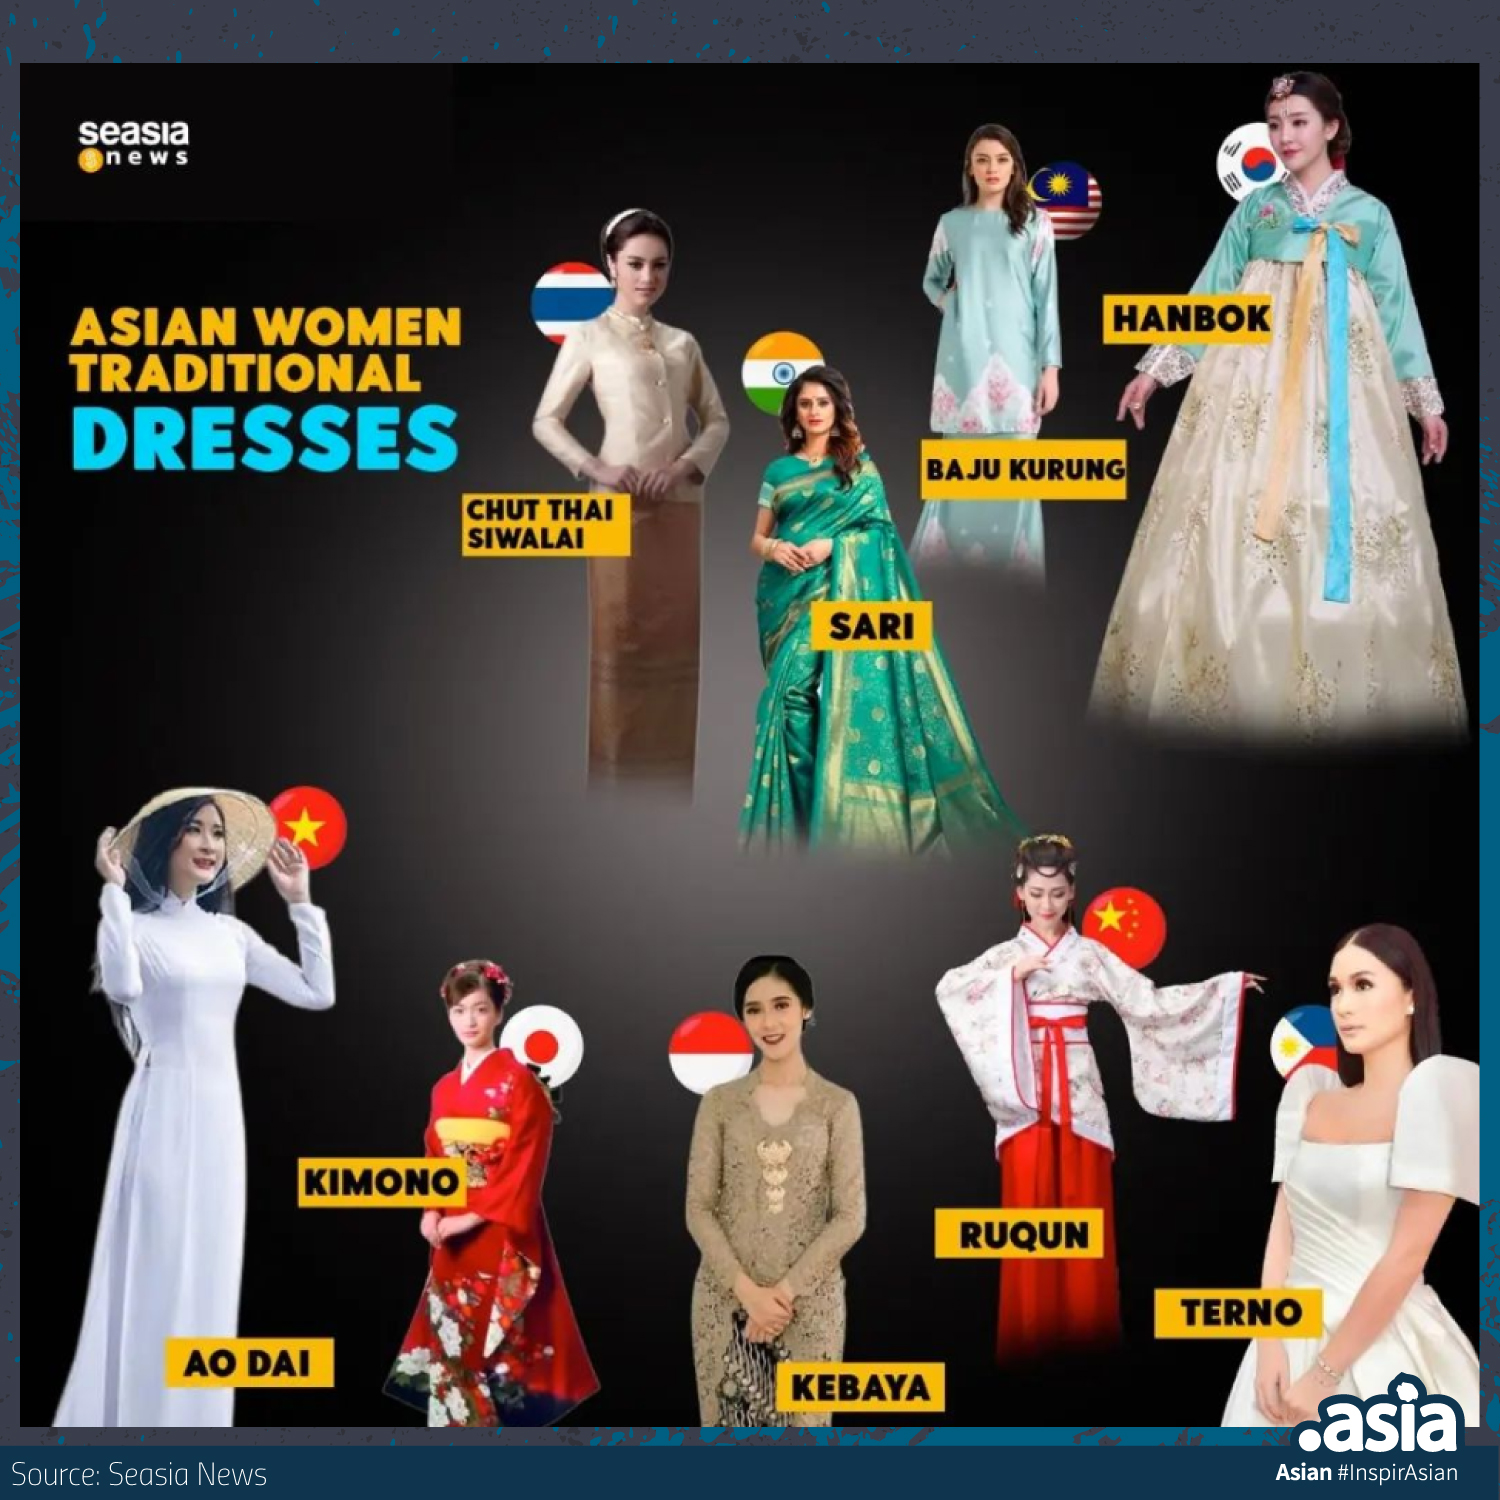 Image poll: Asian women traditional dresses